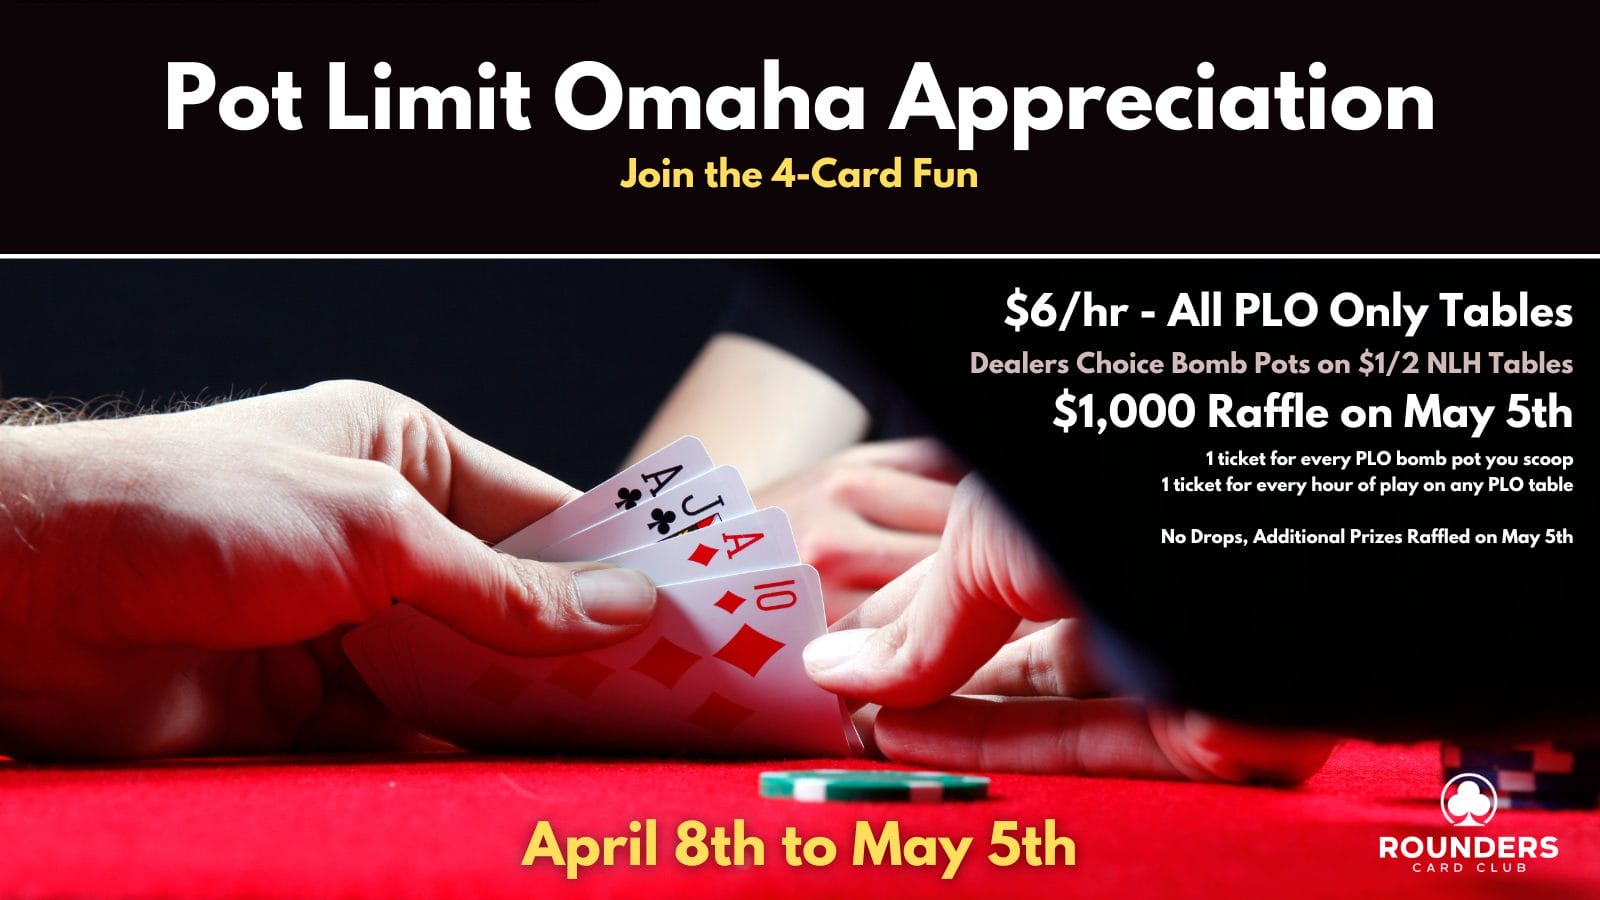 PLO promo - April 8th to May 5th